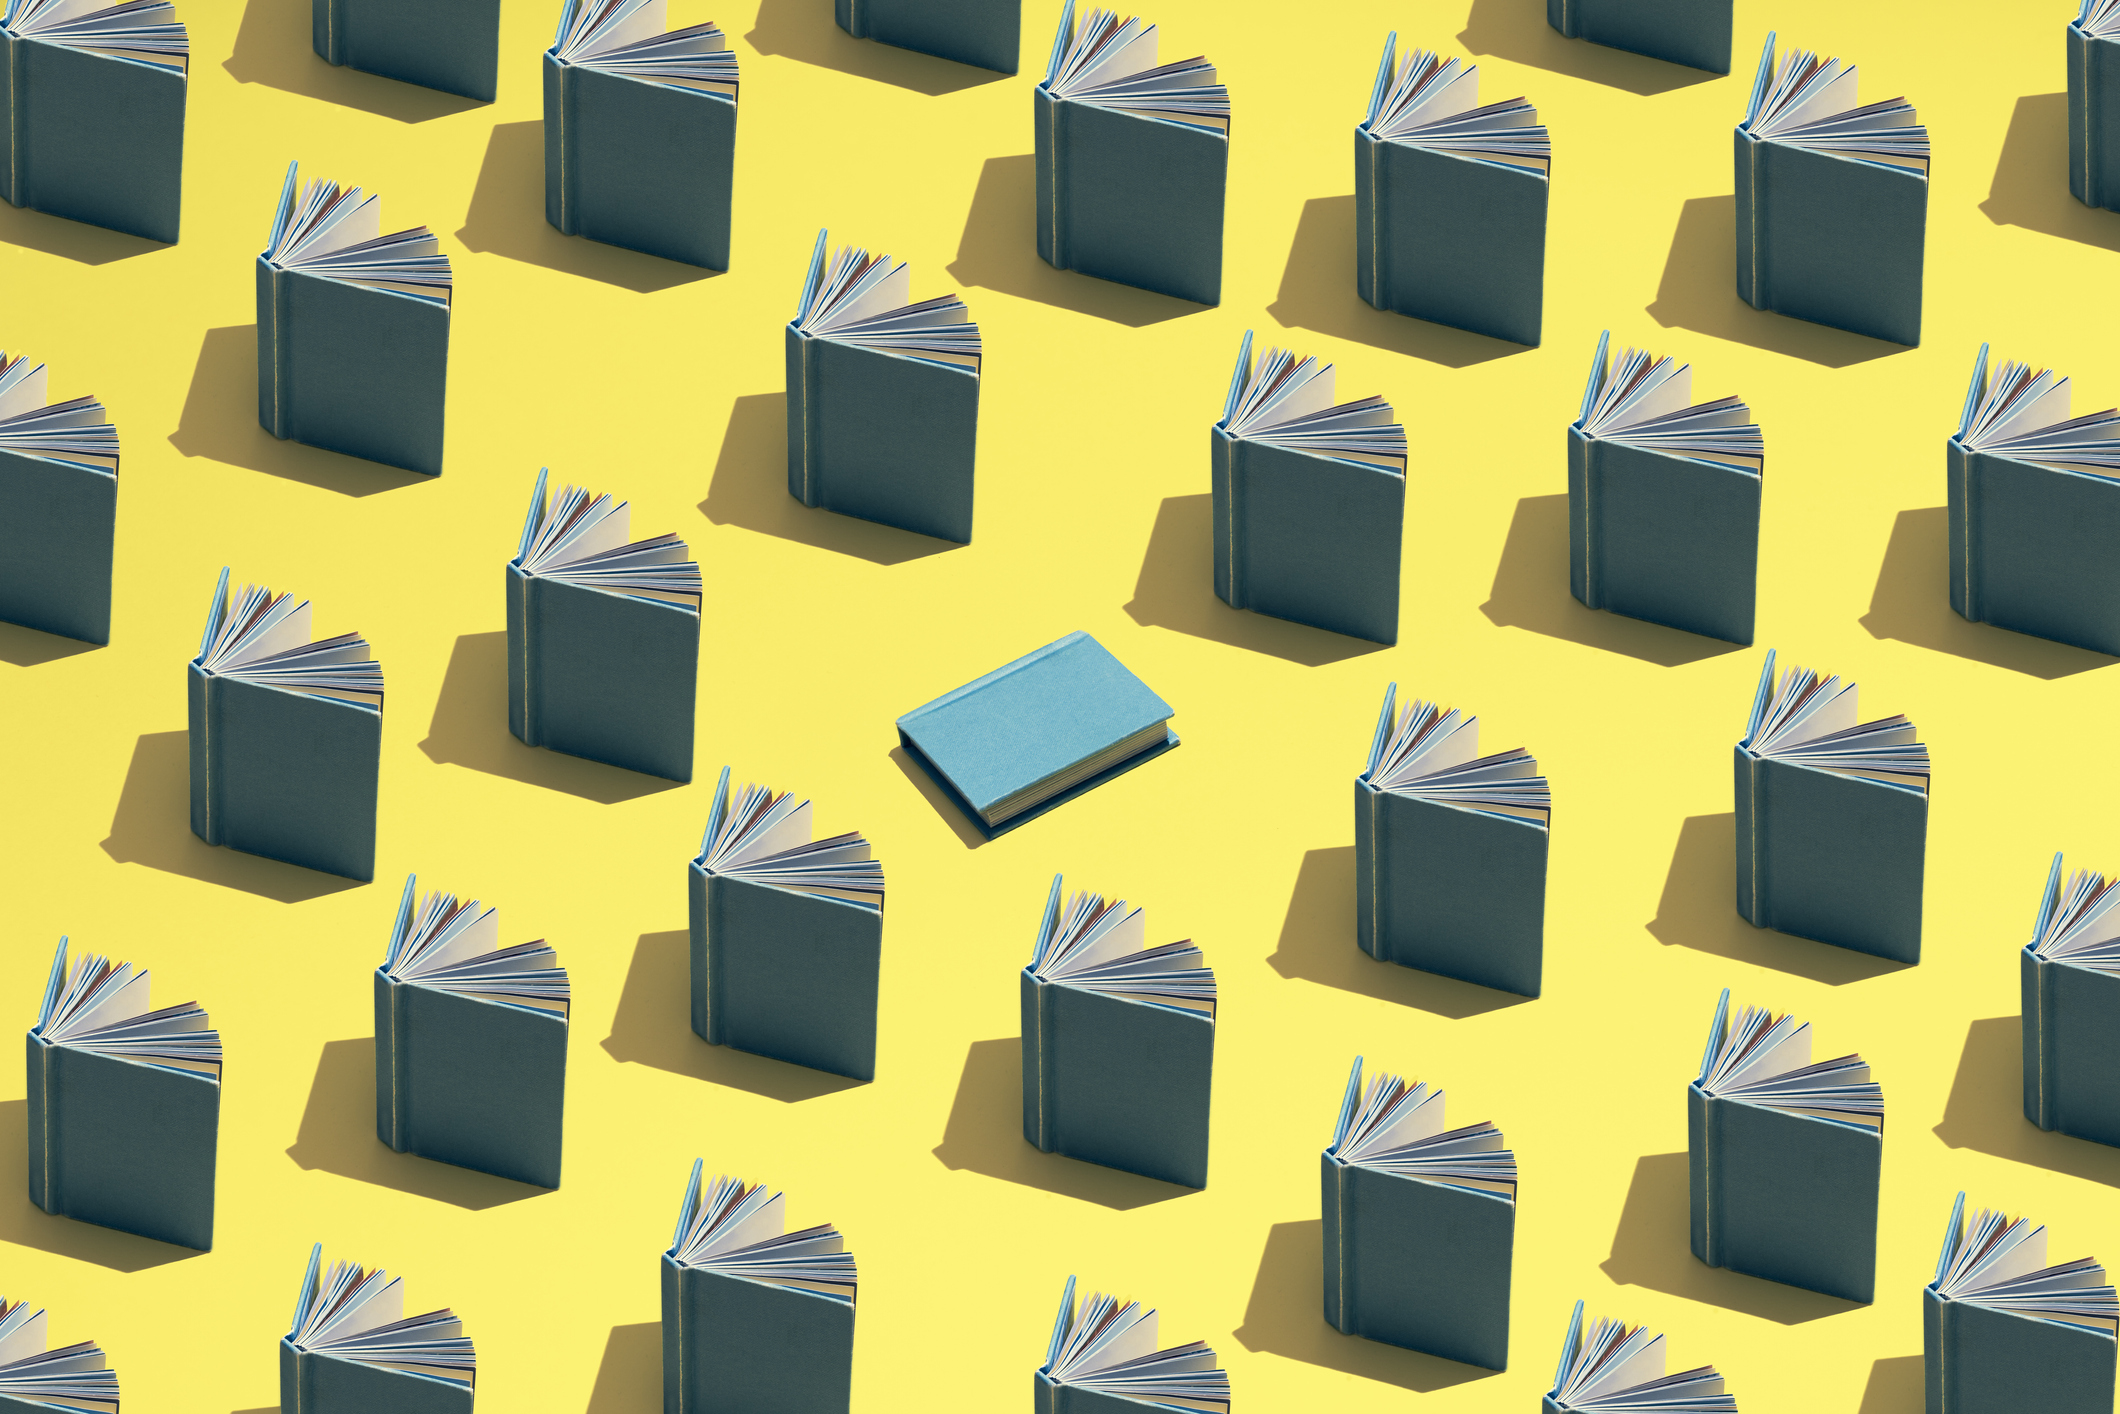 Blog featured image. An illustration of books propped open in rows against a yellow field and one blue book in center.